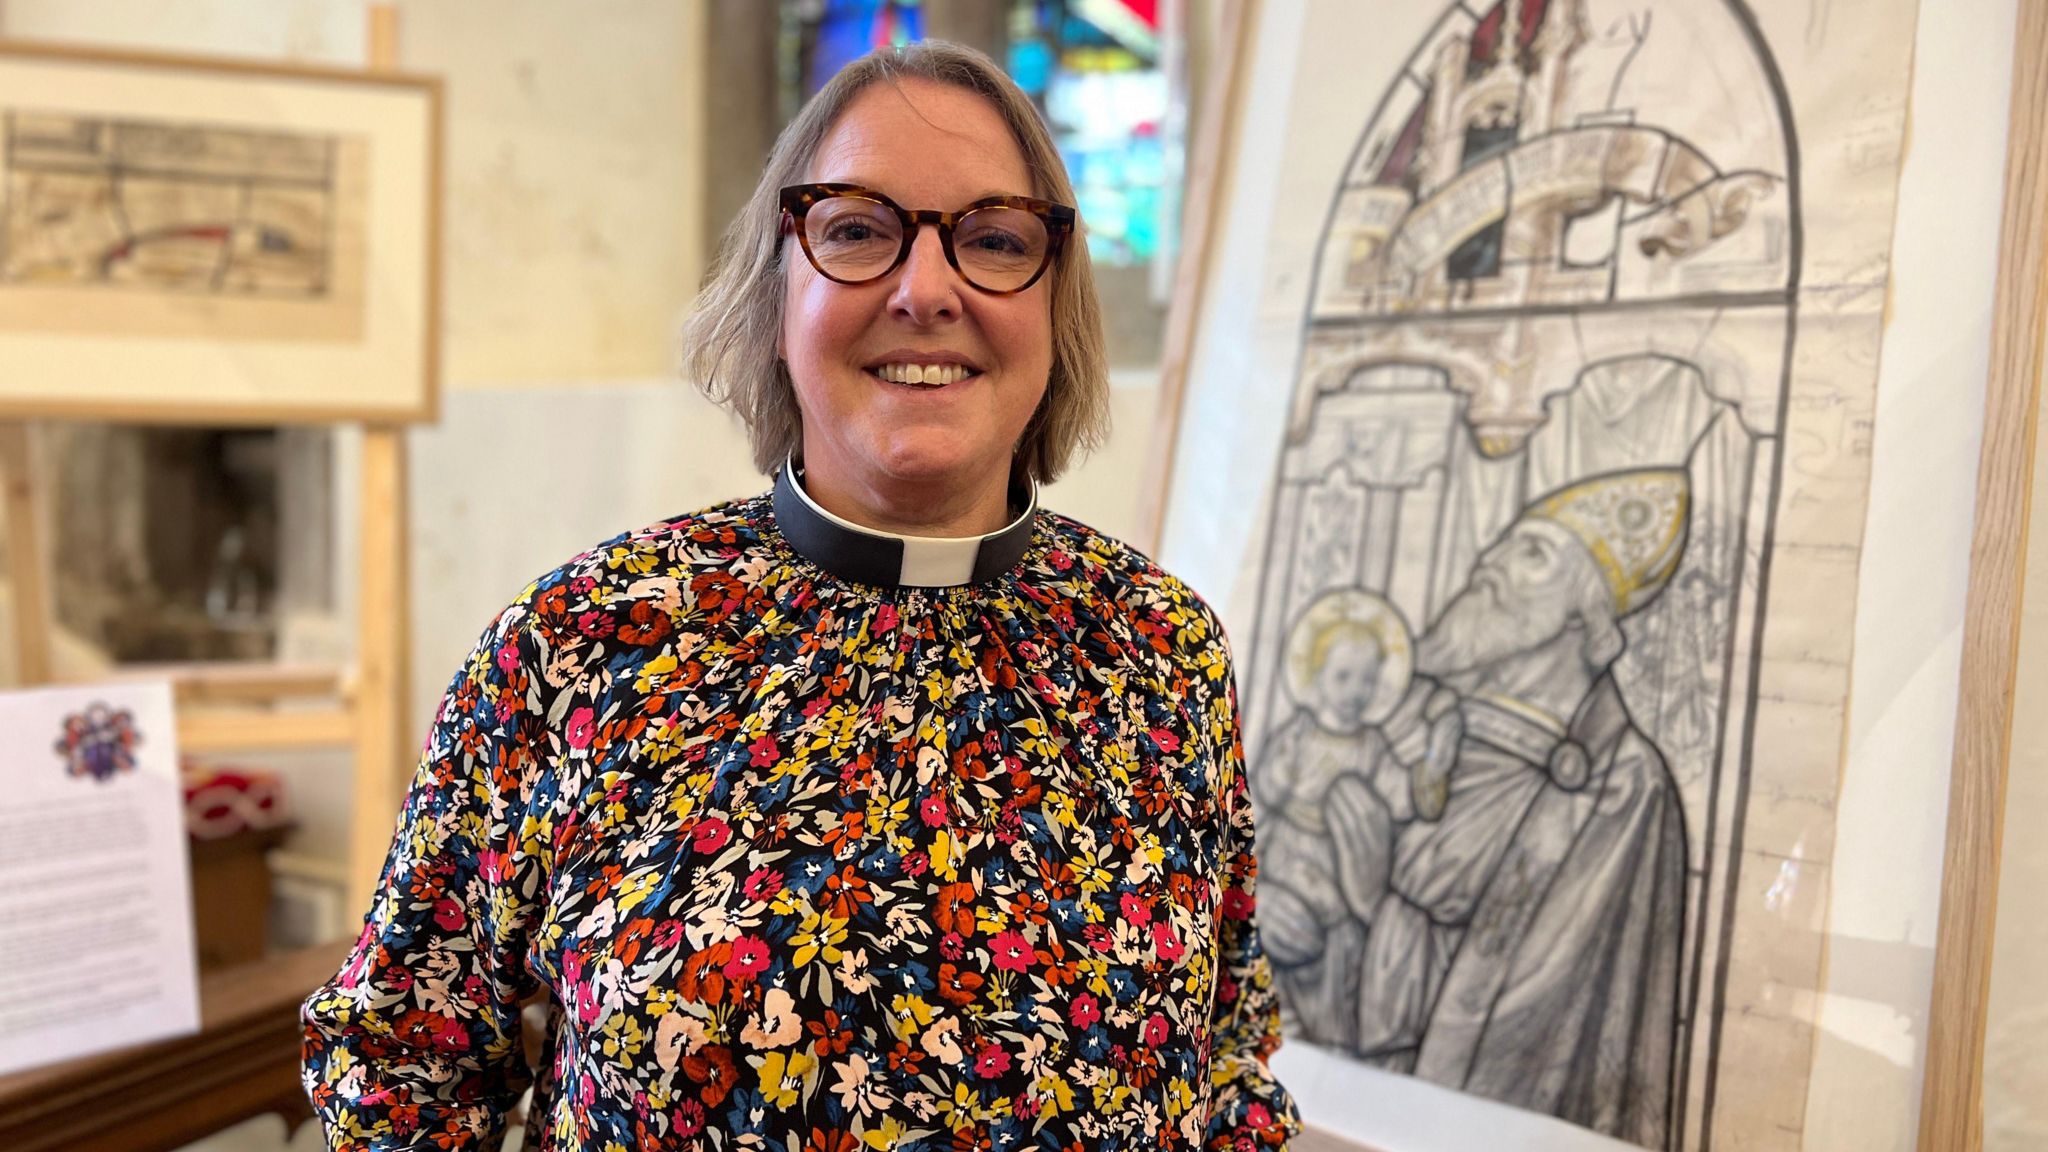 Reverend Allan smiles at the camera with a framed cartoon drawing behind her